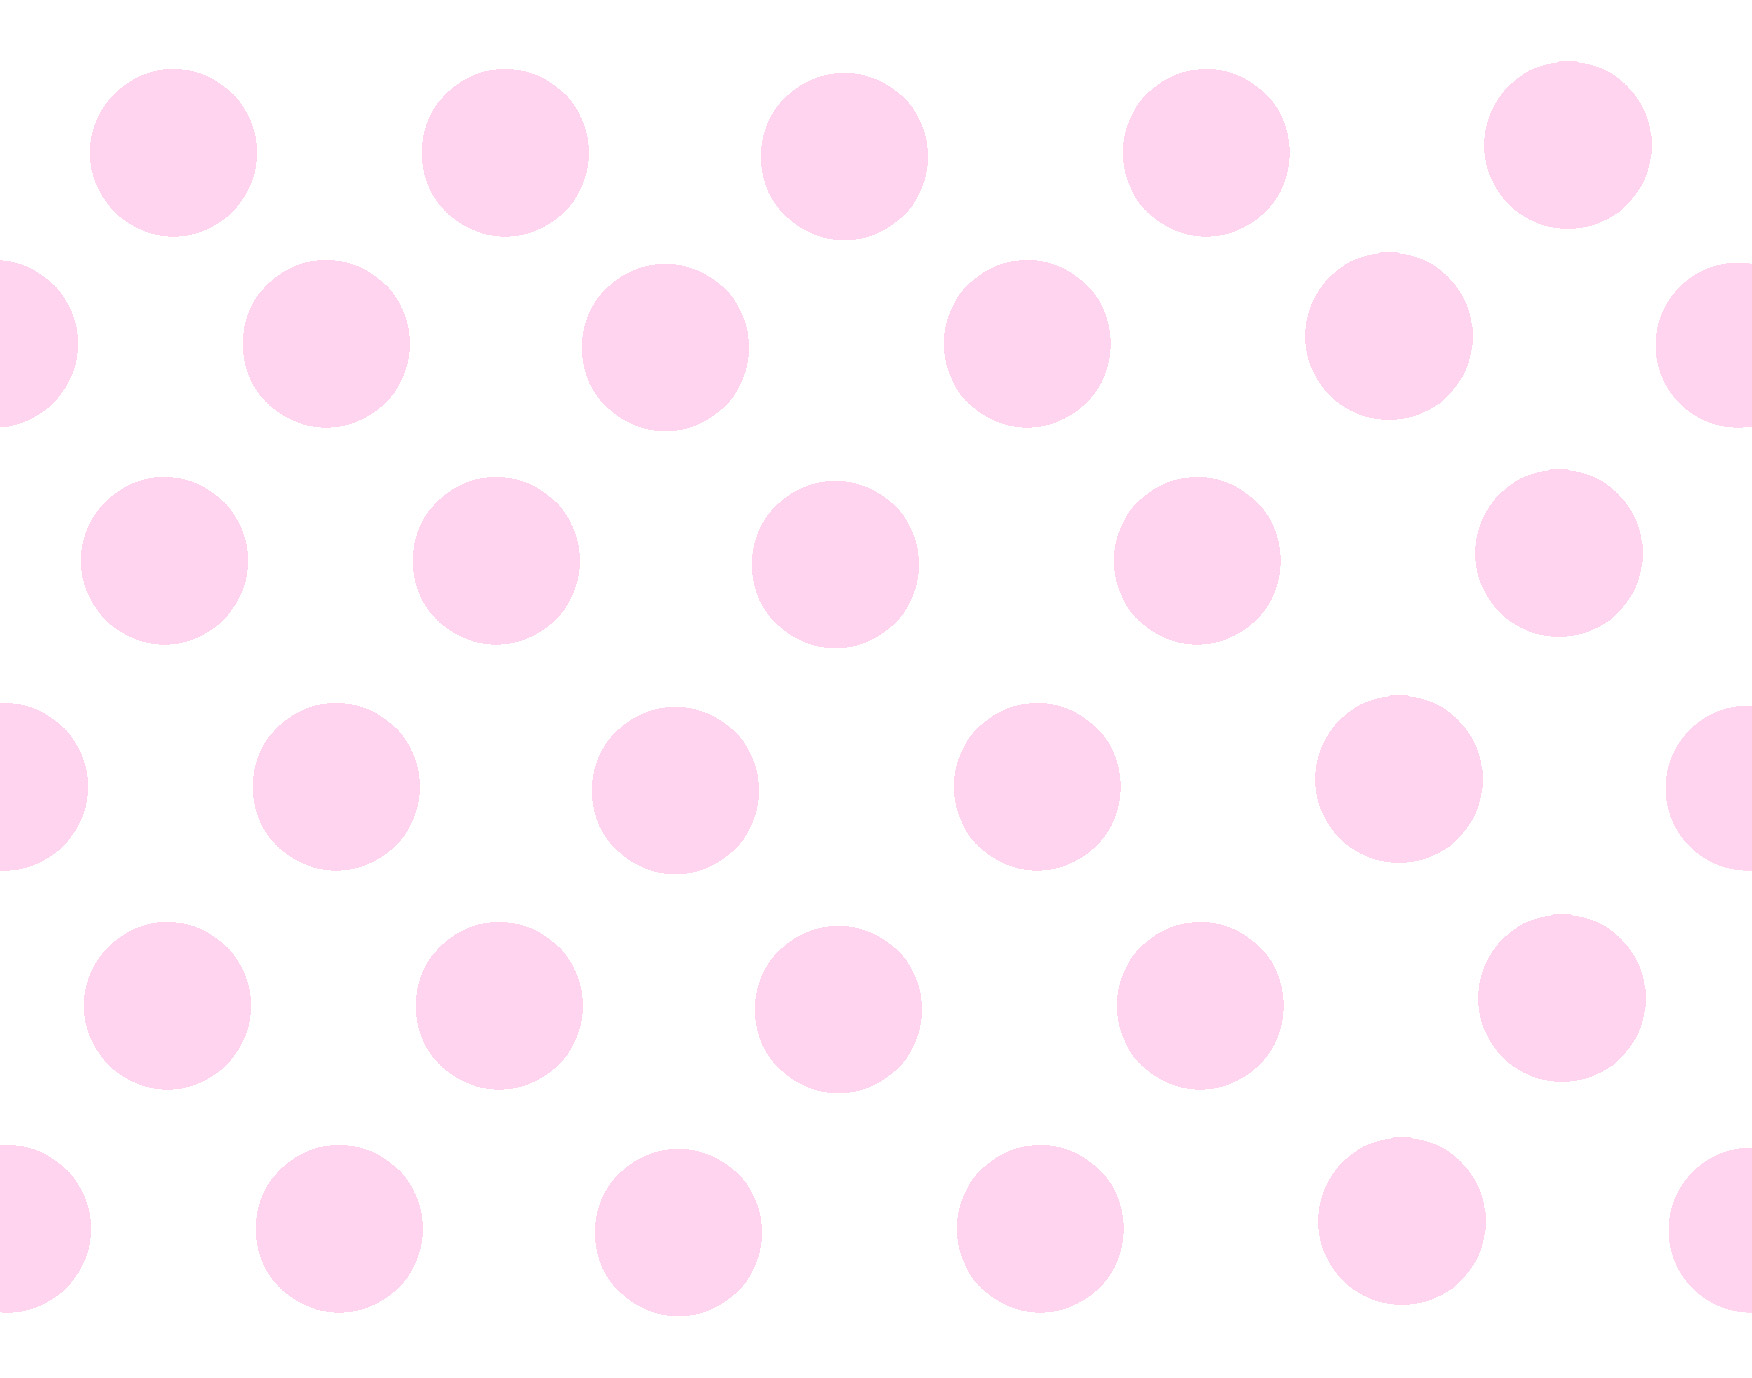 Cute Polka Dot Backgrounds for Powerpoint Templates - PPT Backgrounds